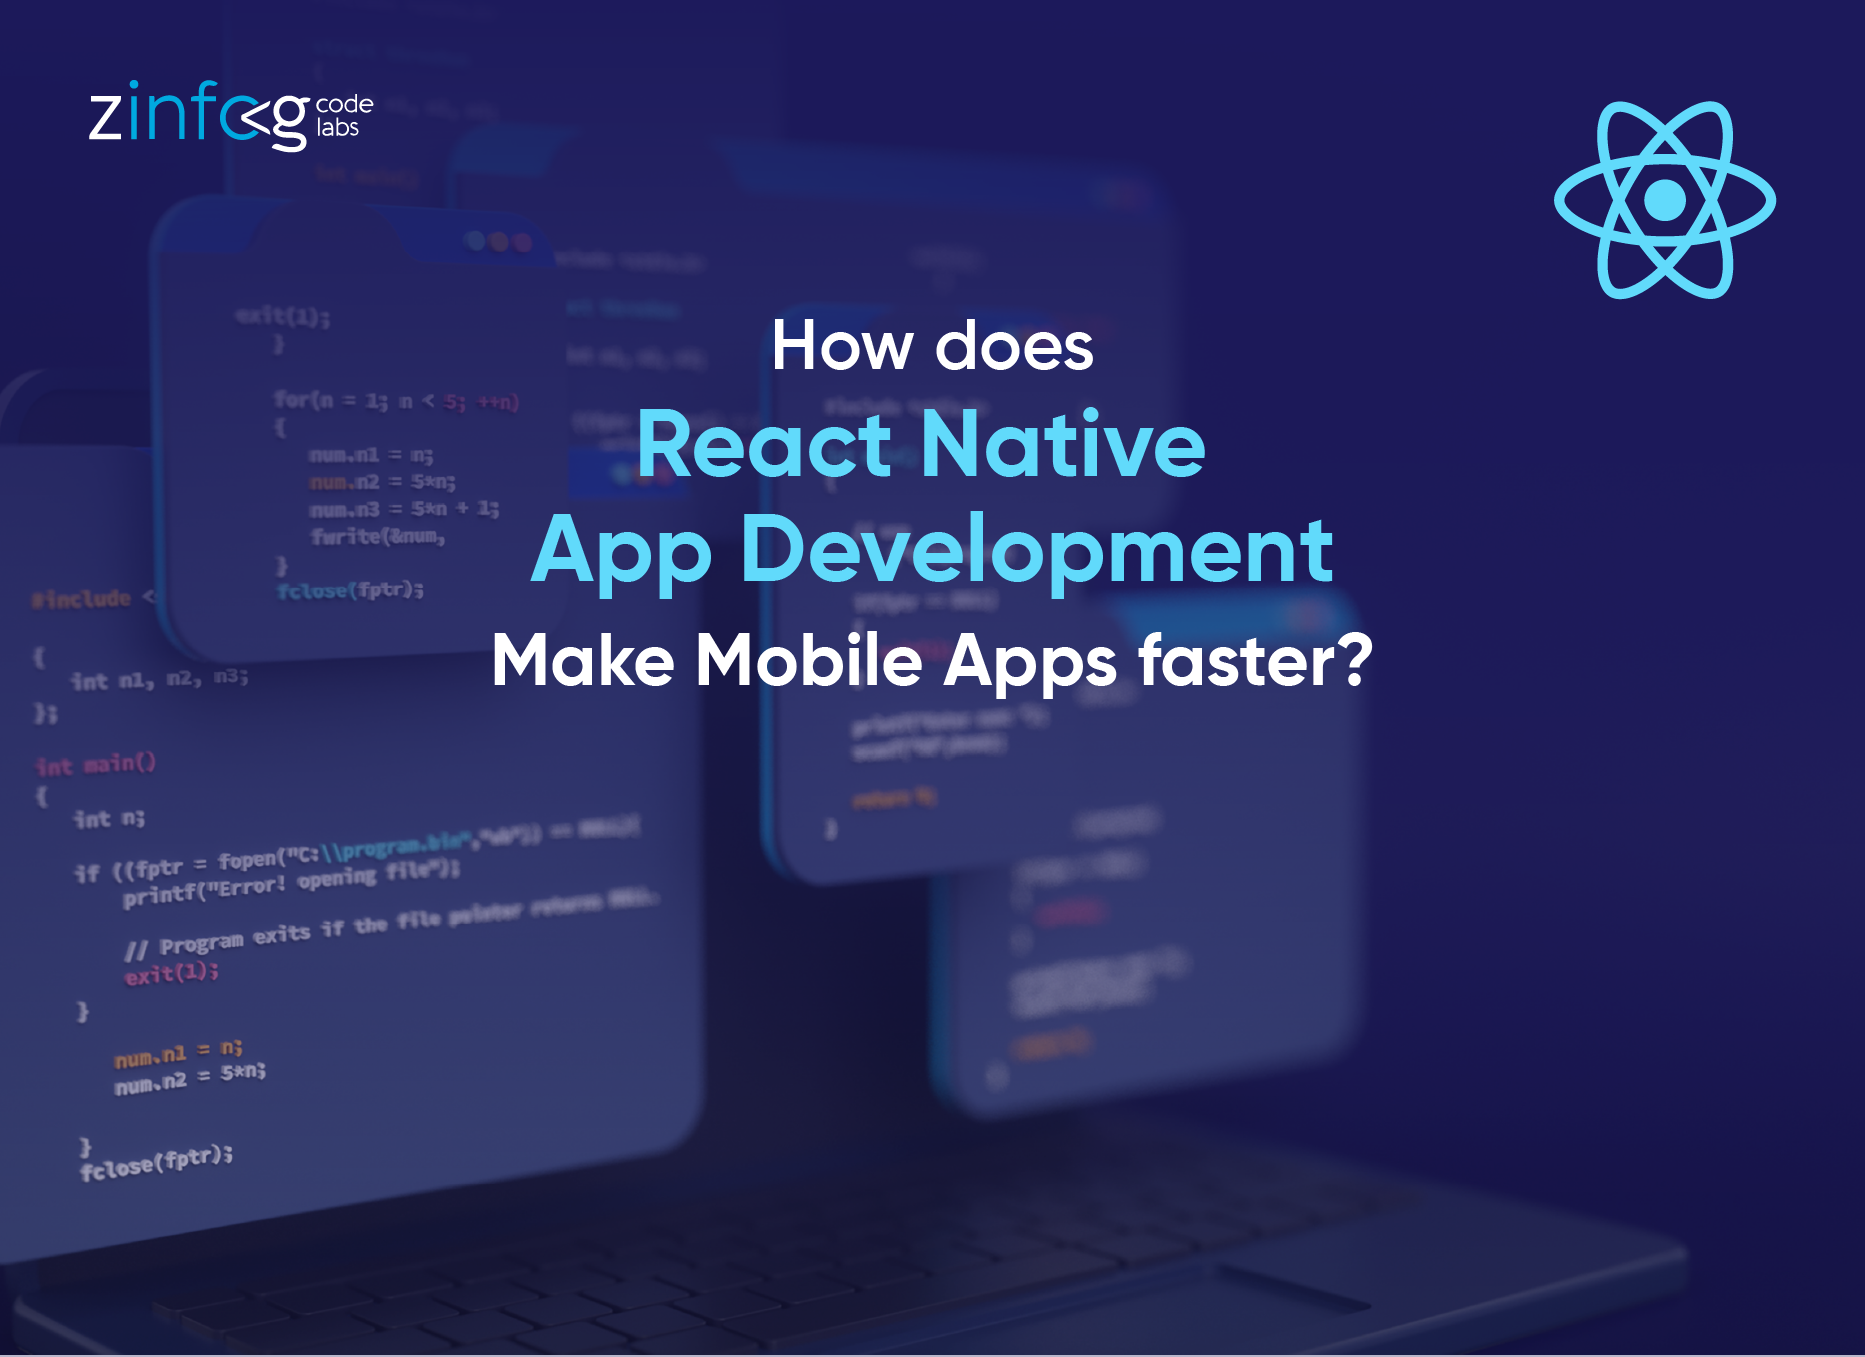 how-does-react-native-app-development-make-mobile-apps-faster.html